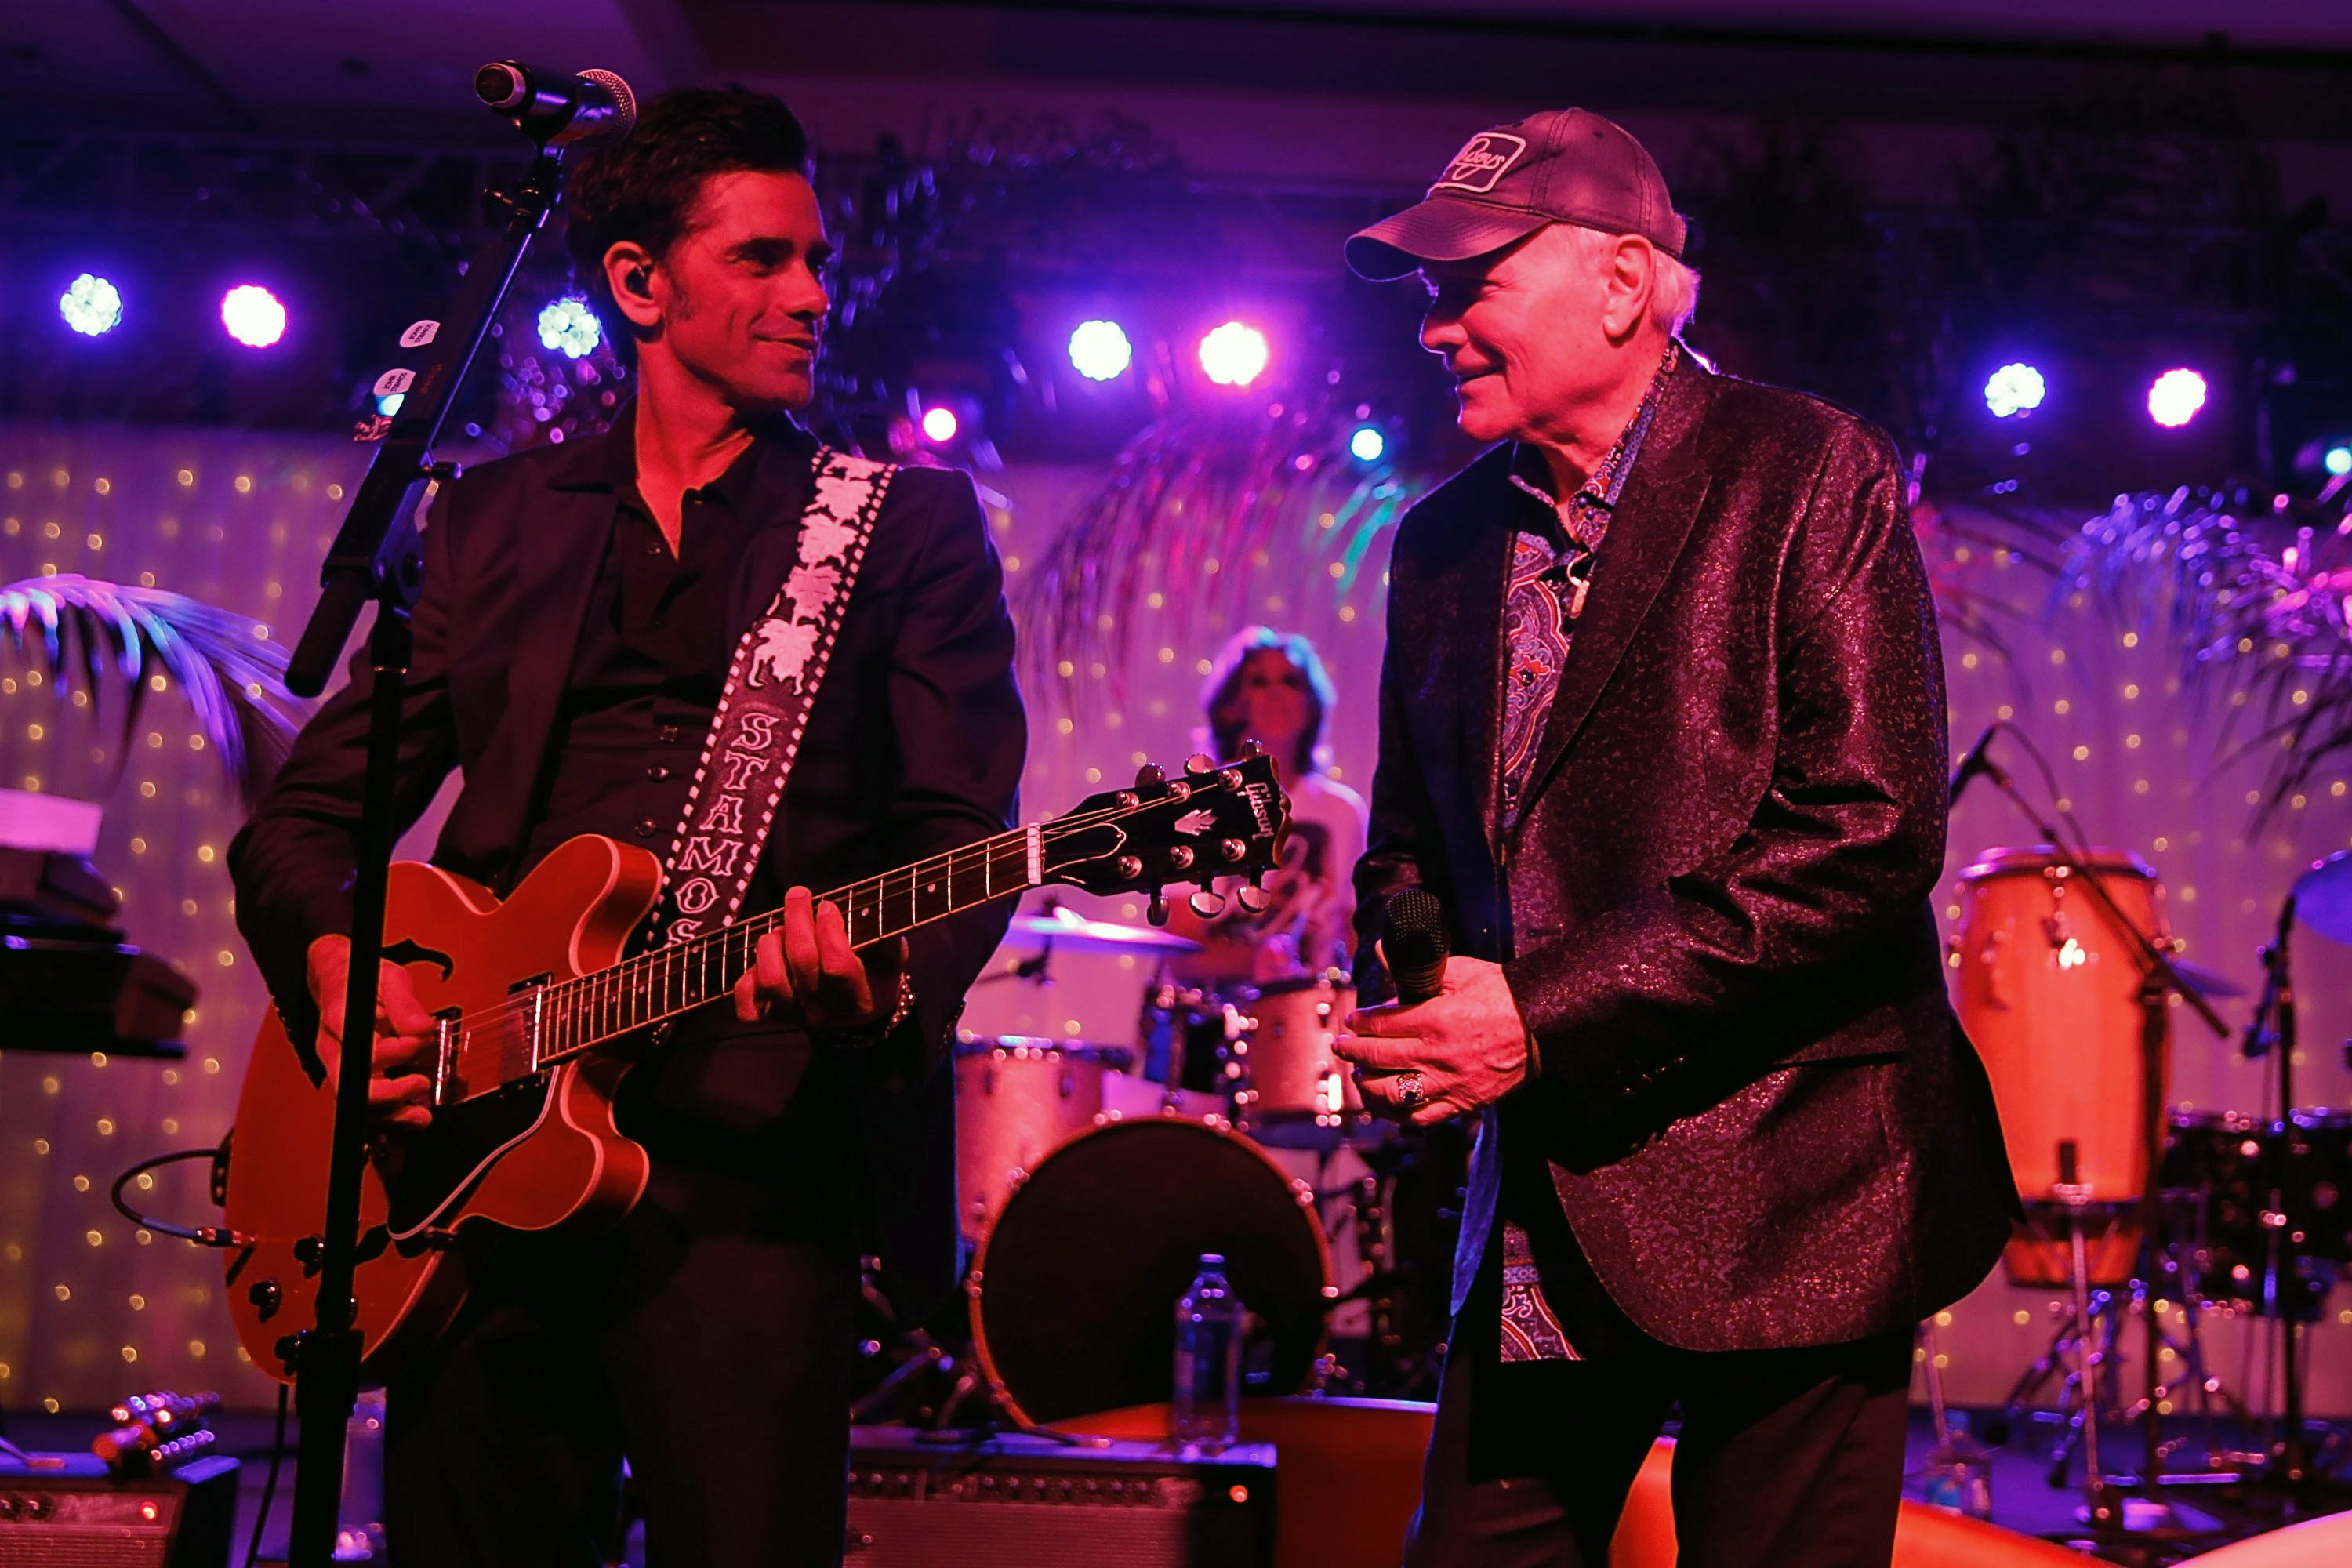 John Stamos and Mike Love perform at the Goodwill of Orange County Gala with John Stamos and The Beach Boys